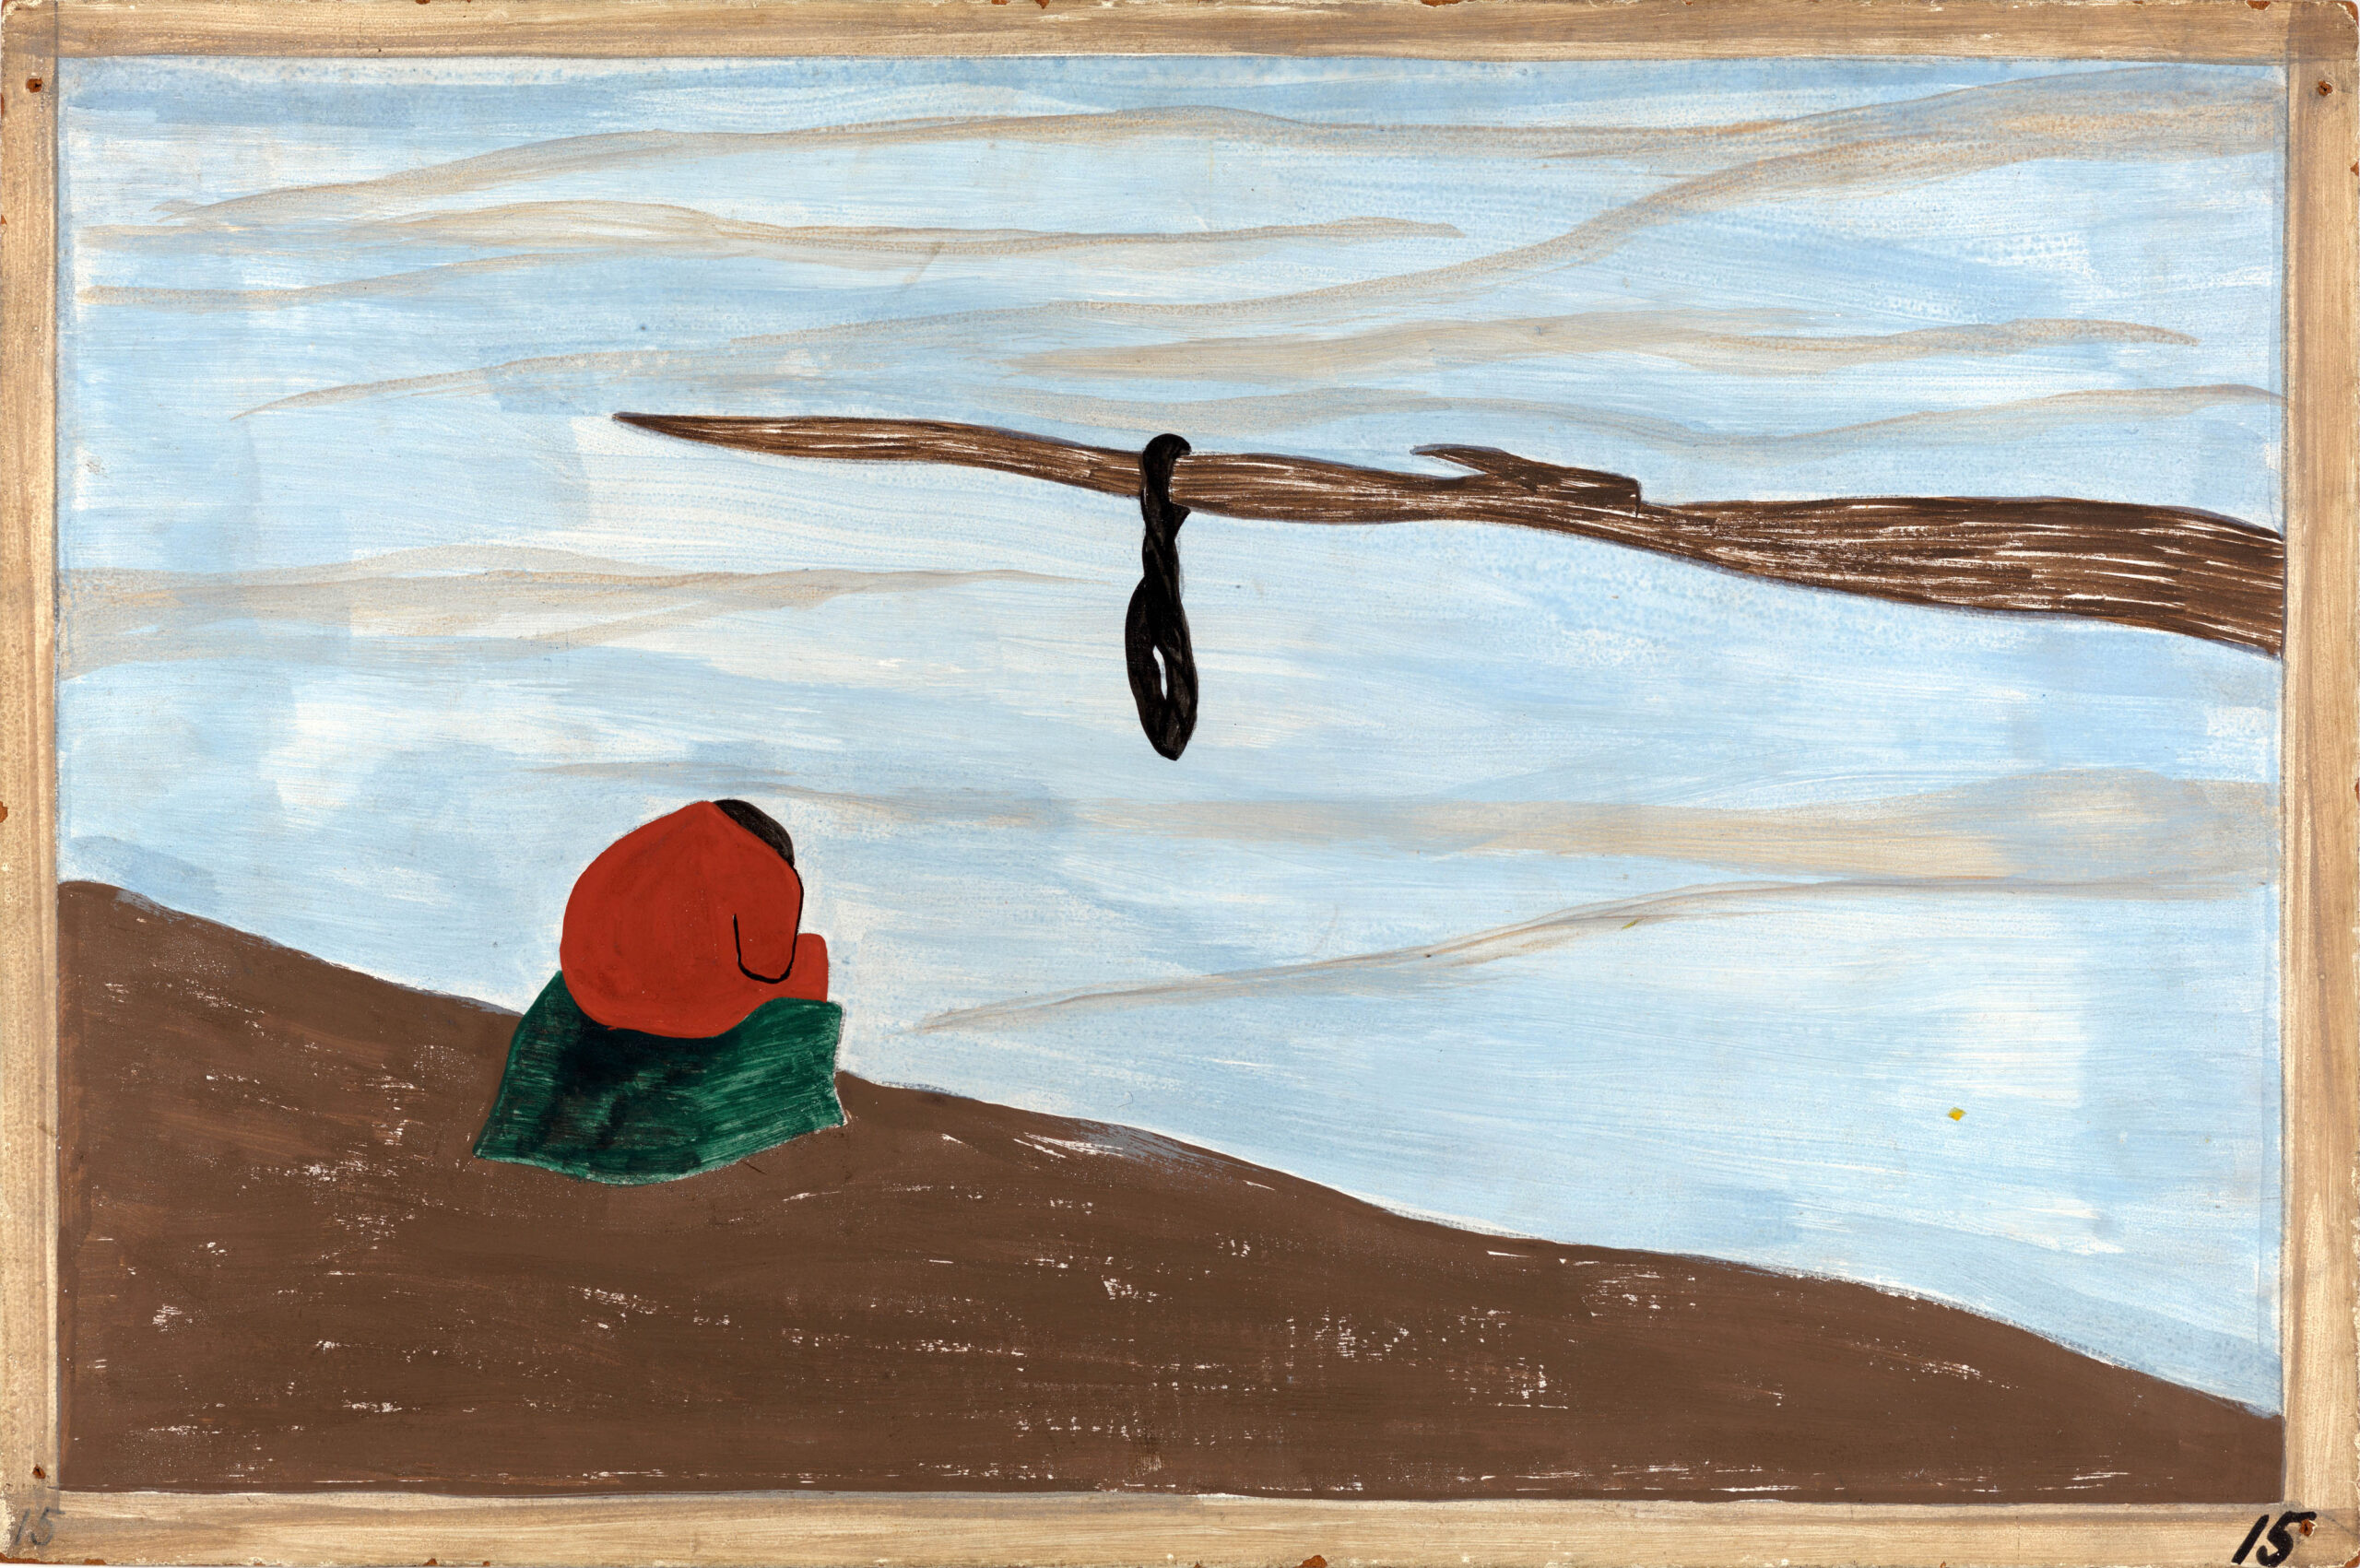 Jacob Lawrence, "There were lynchings," panel 15: The Migration Series, 1940–41, 60 panels, tempera on hardboard, 30.48 x 45.72 cm (Phillips Collection, Washington D.C.)